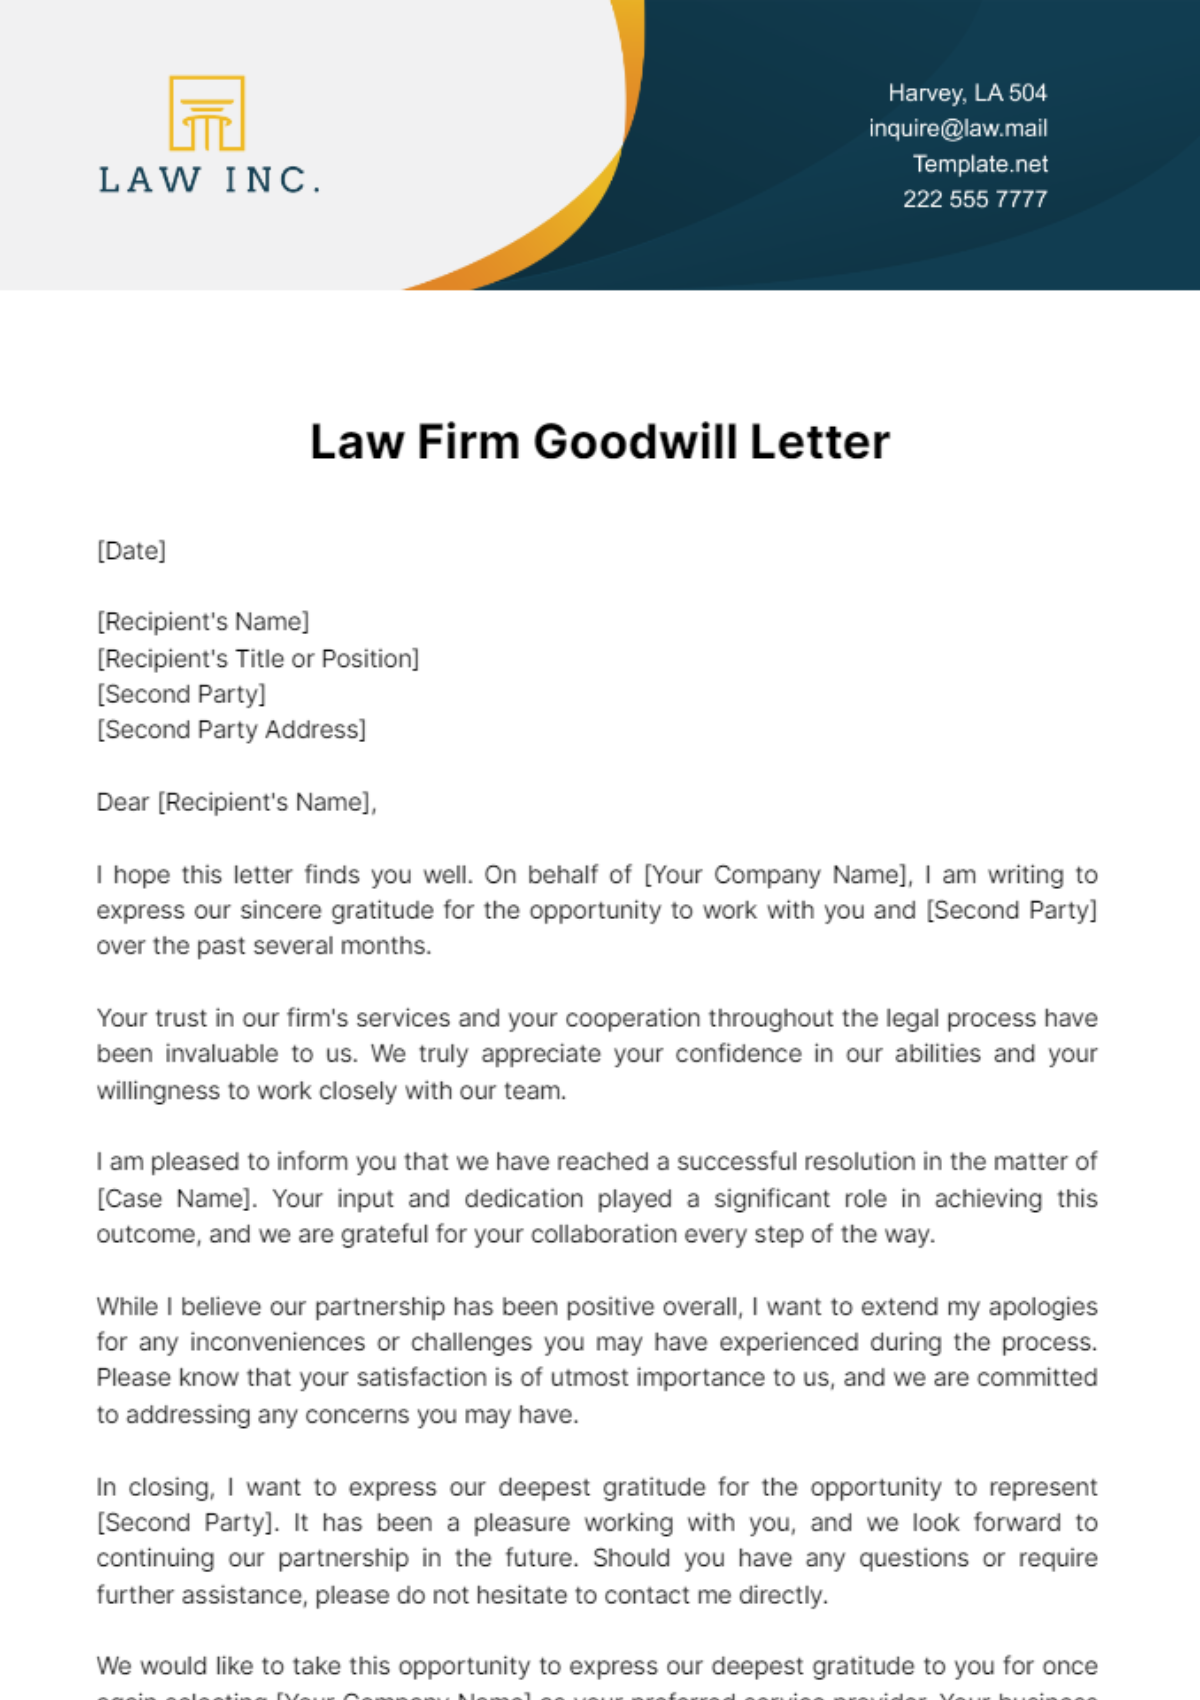 Free Law Firm Goodwill Letter Template